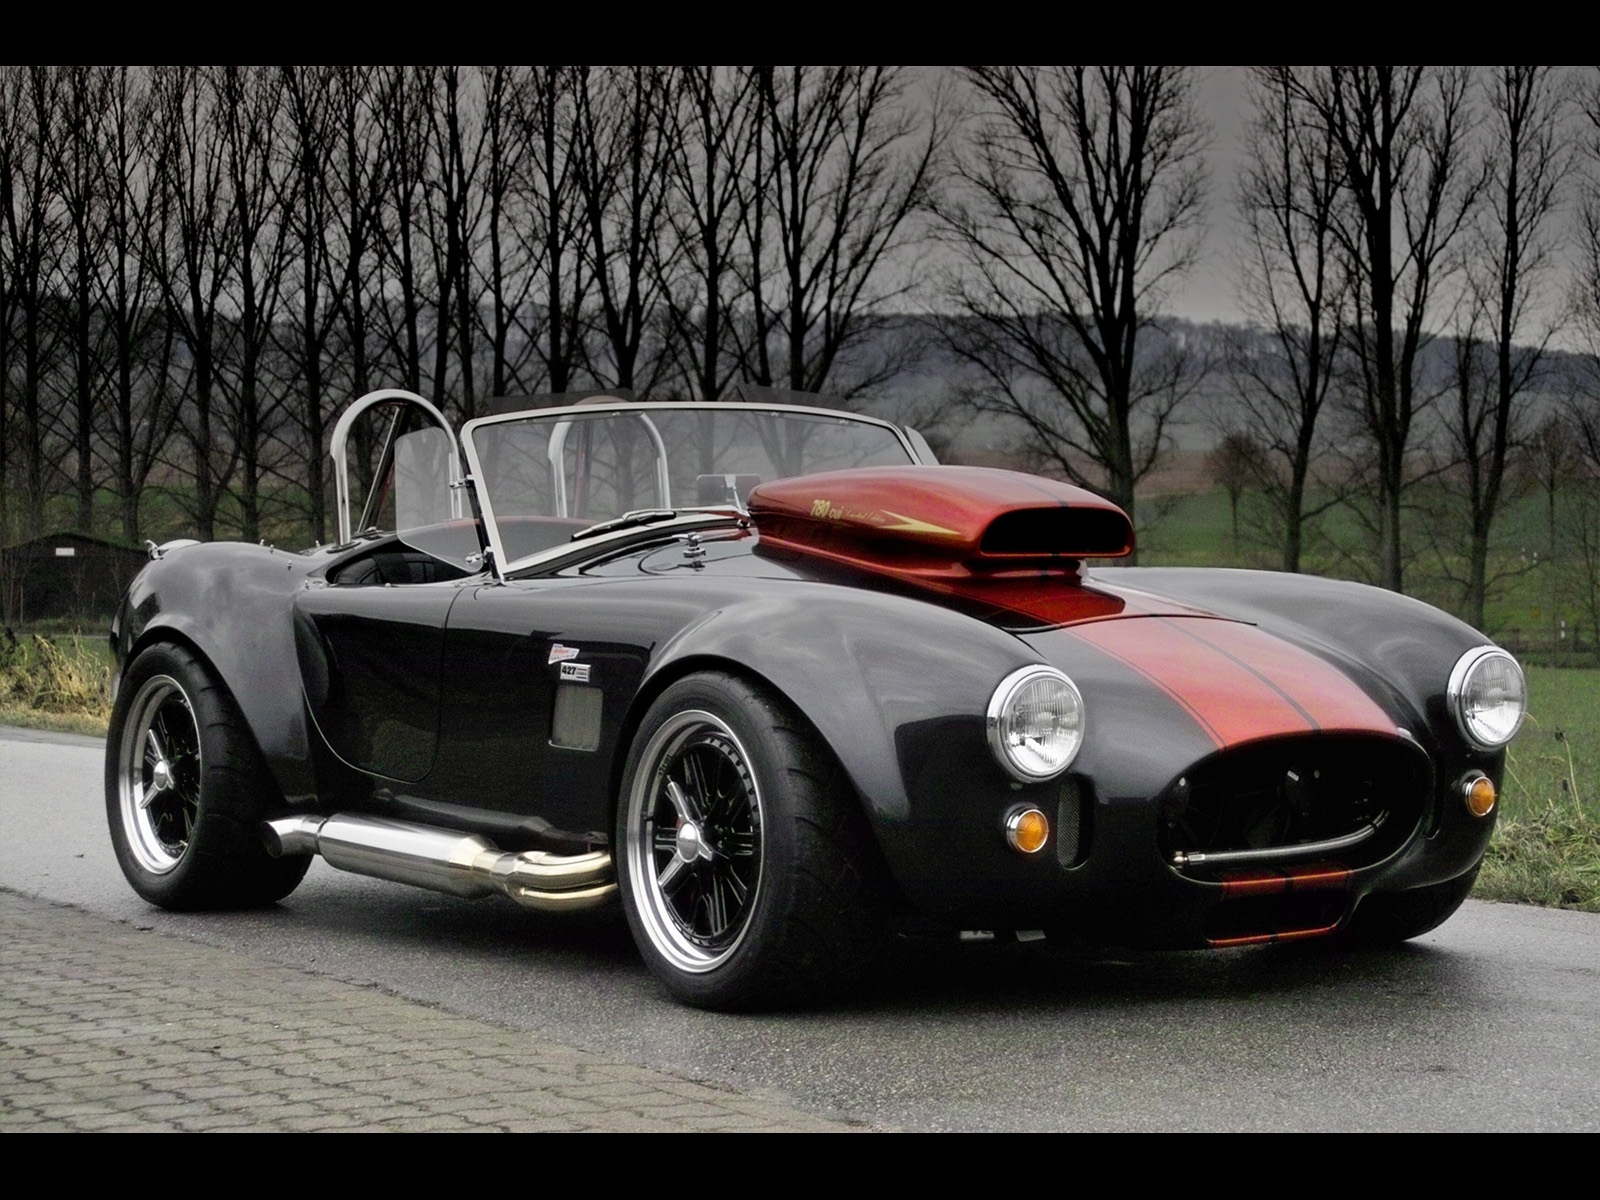 Ford Shelby Cobra Hot Rod Muscle Cars Wallpaper